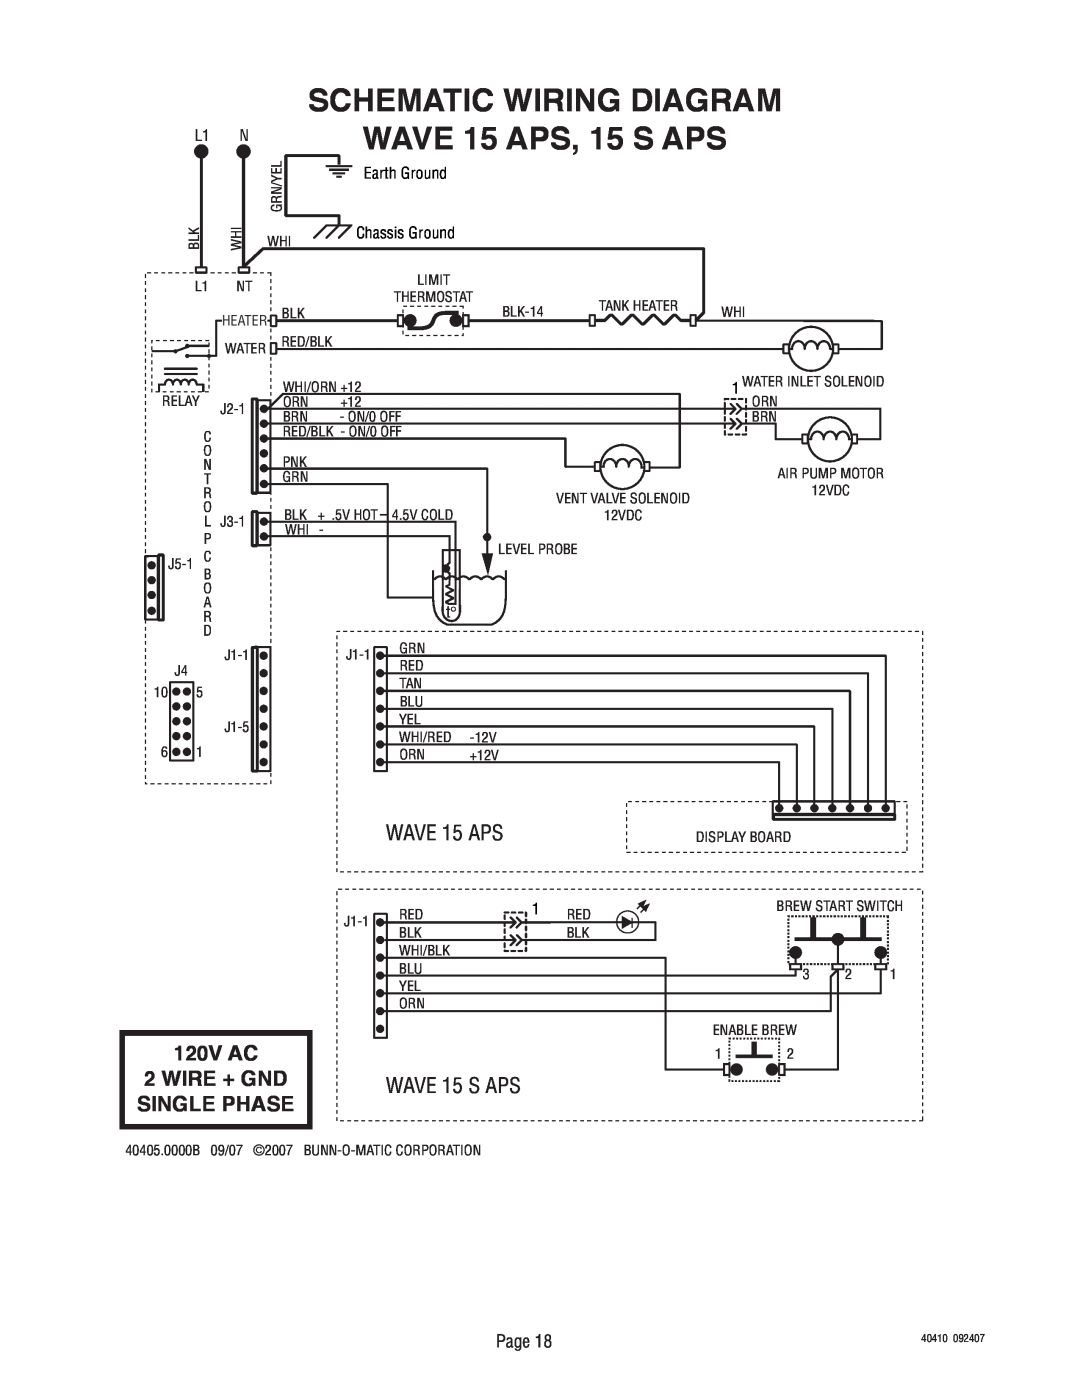 Bunn Smart Wave Series manual SCHEMATIC WIRING DIAGRAM WAVE 15 APS, 15 S APS, 120V AC 2 WIRE + GND SINGLE PHASE, Page, L1 N 